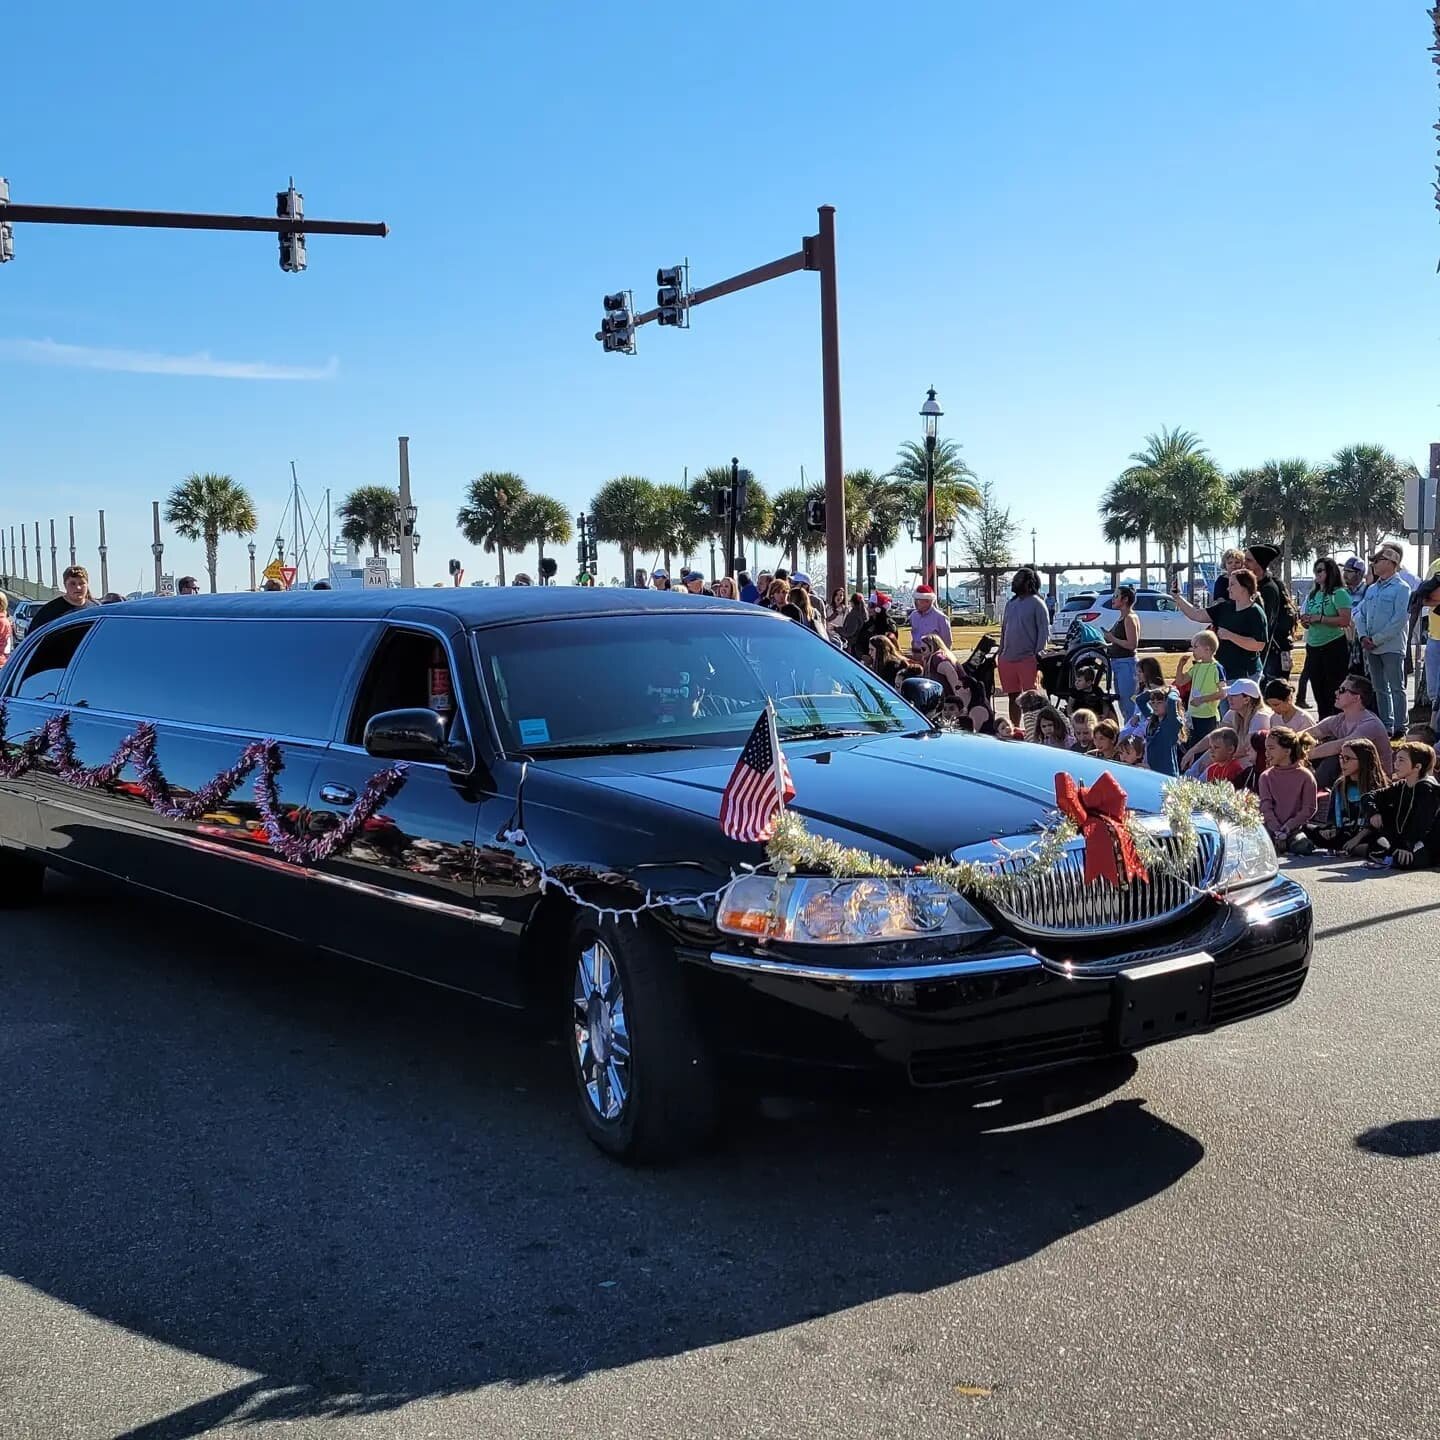 It was such a great time at this year's St. Augustine Christmas parade! One of our favorite parts of the holidays.